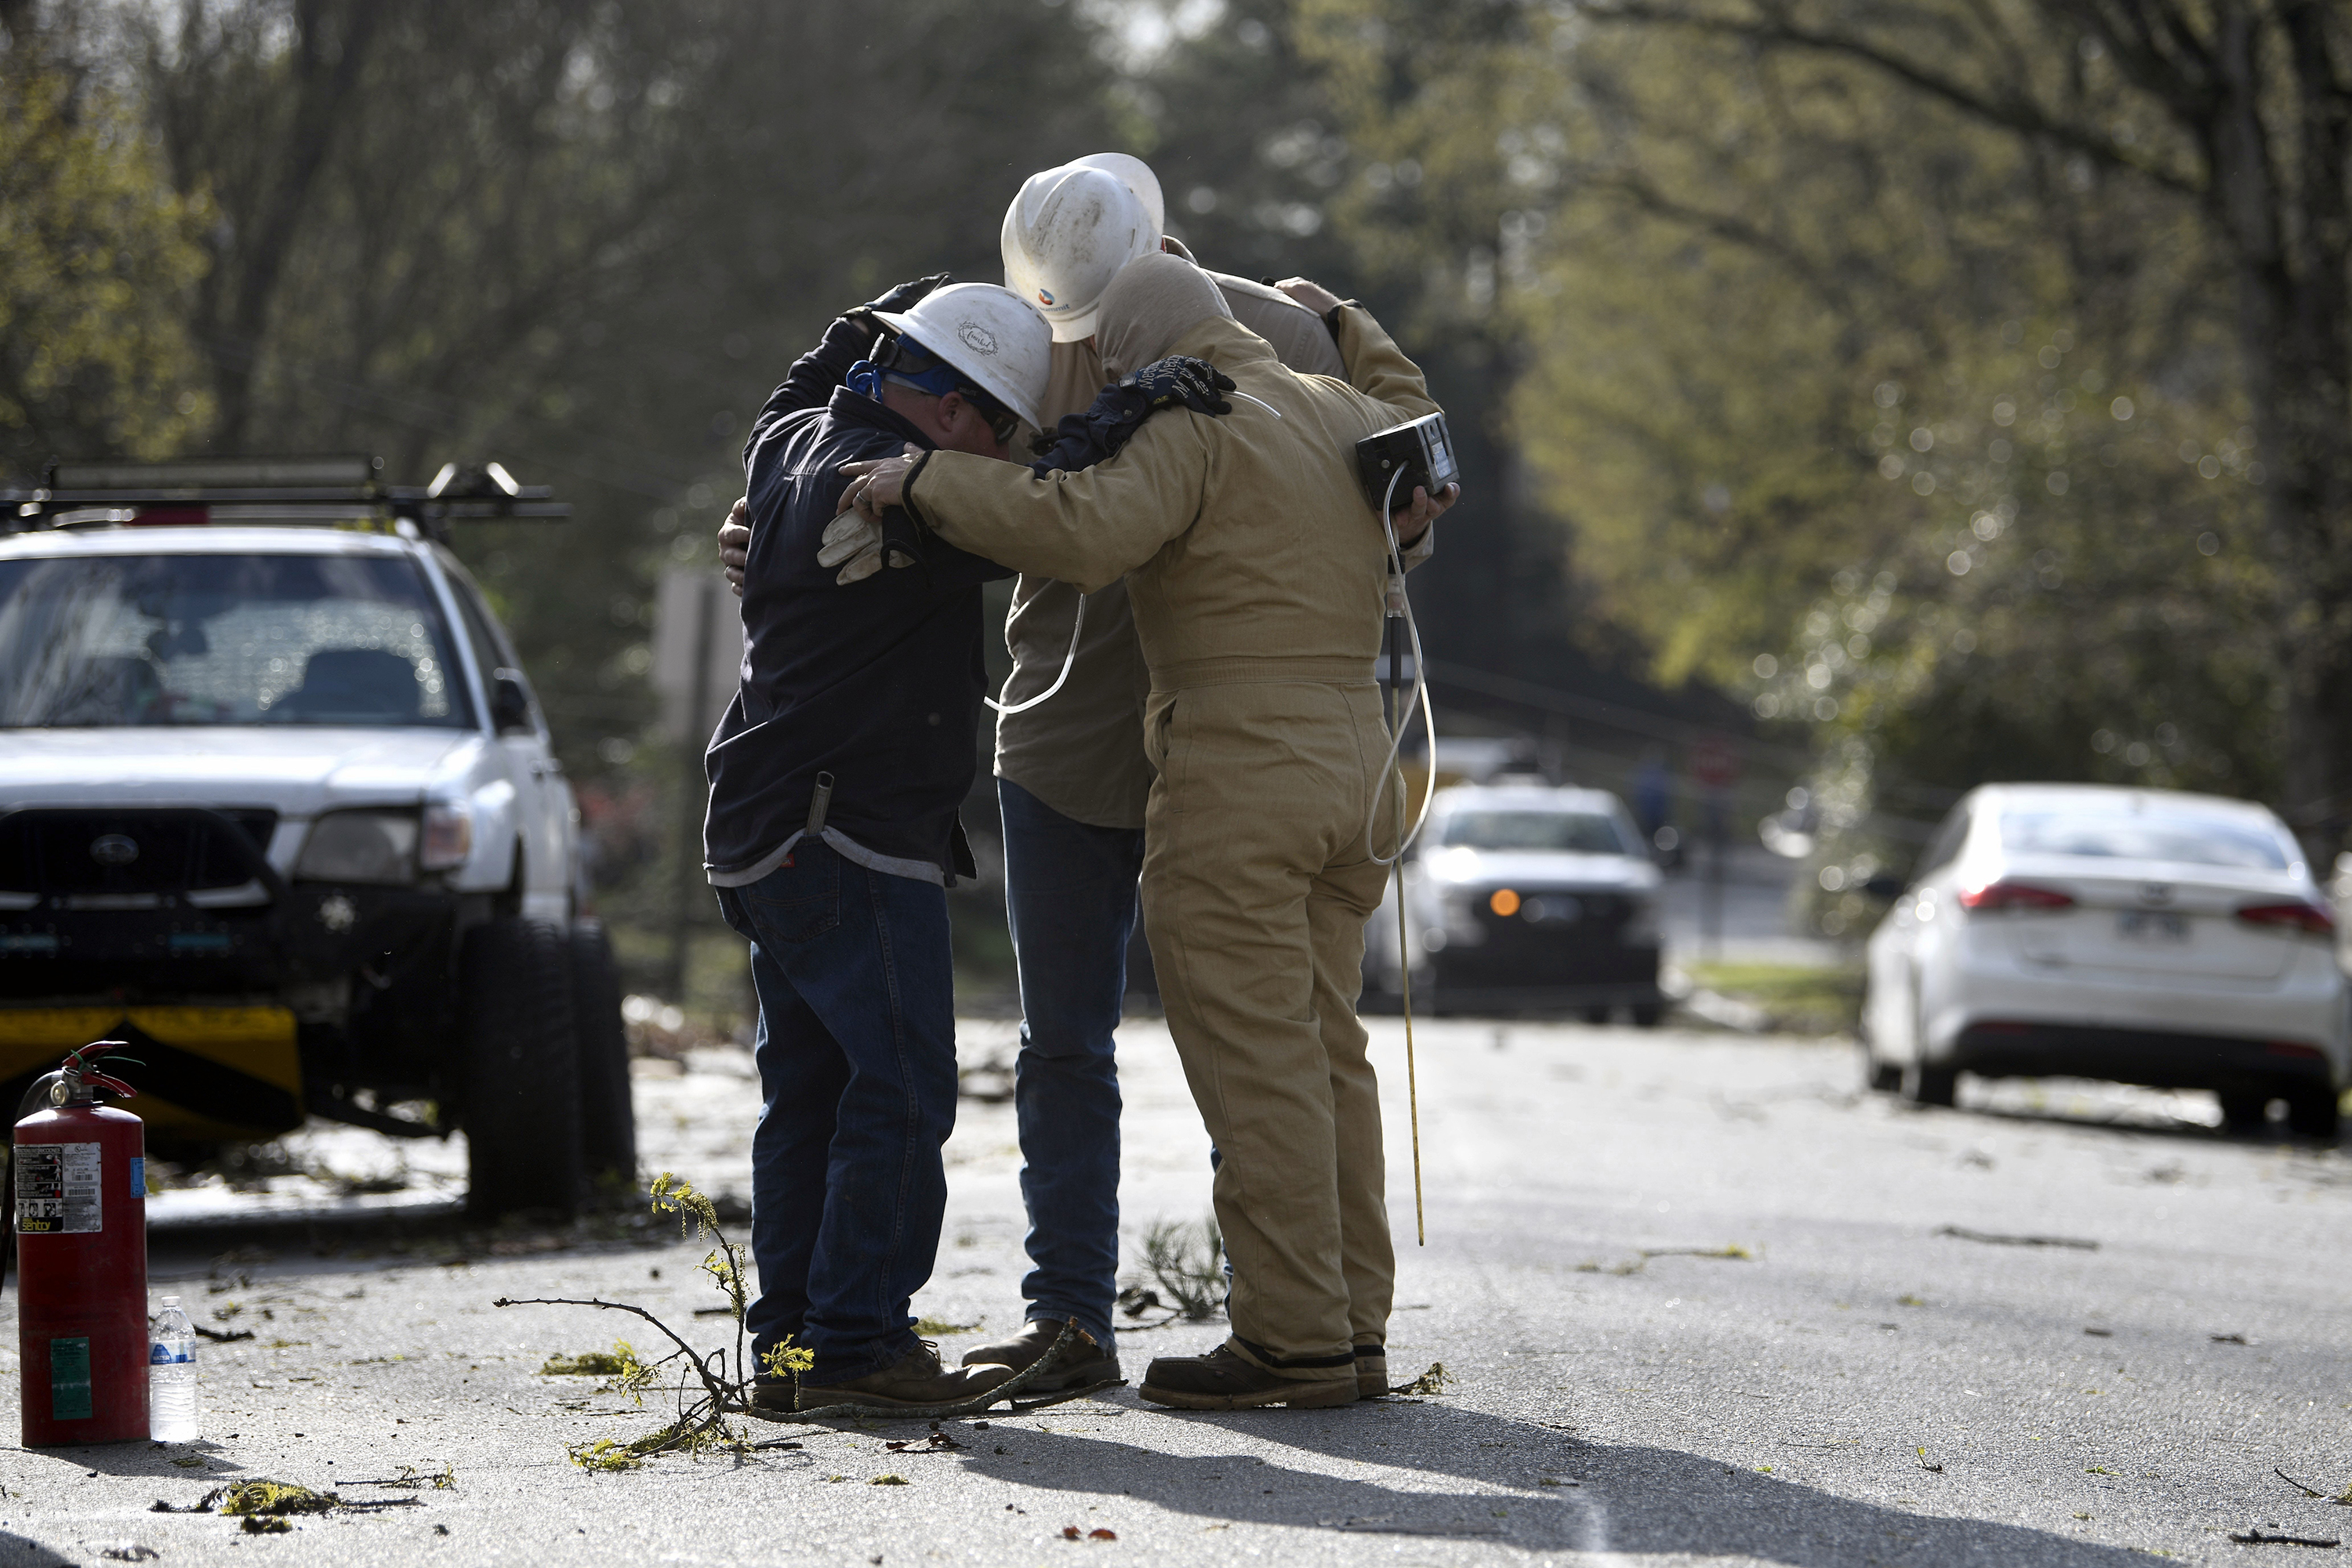 A team from Summit Energy say a prayer together before investigating a burst gas line in Cammack Village after a tornado swept through the area Friday, March 31,  in Little Rock, Arkansas. 